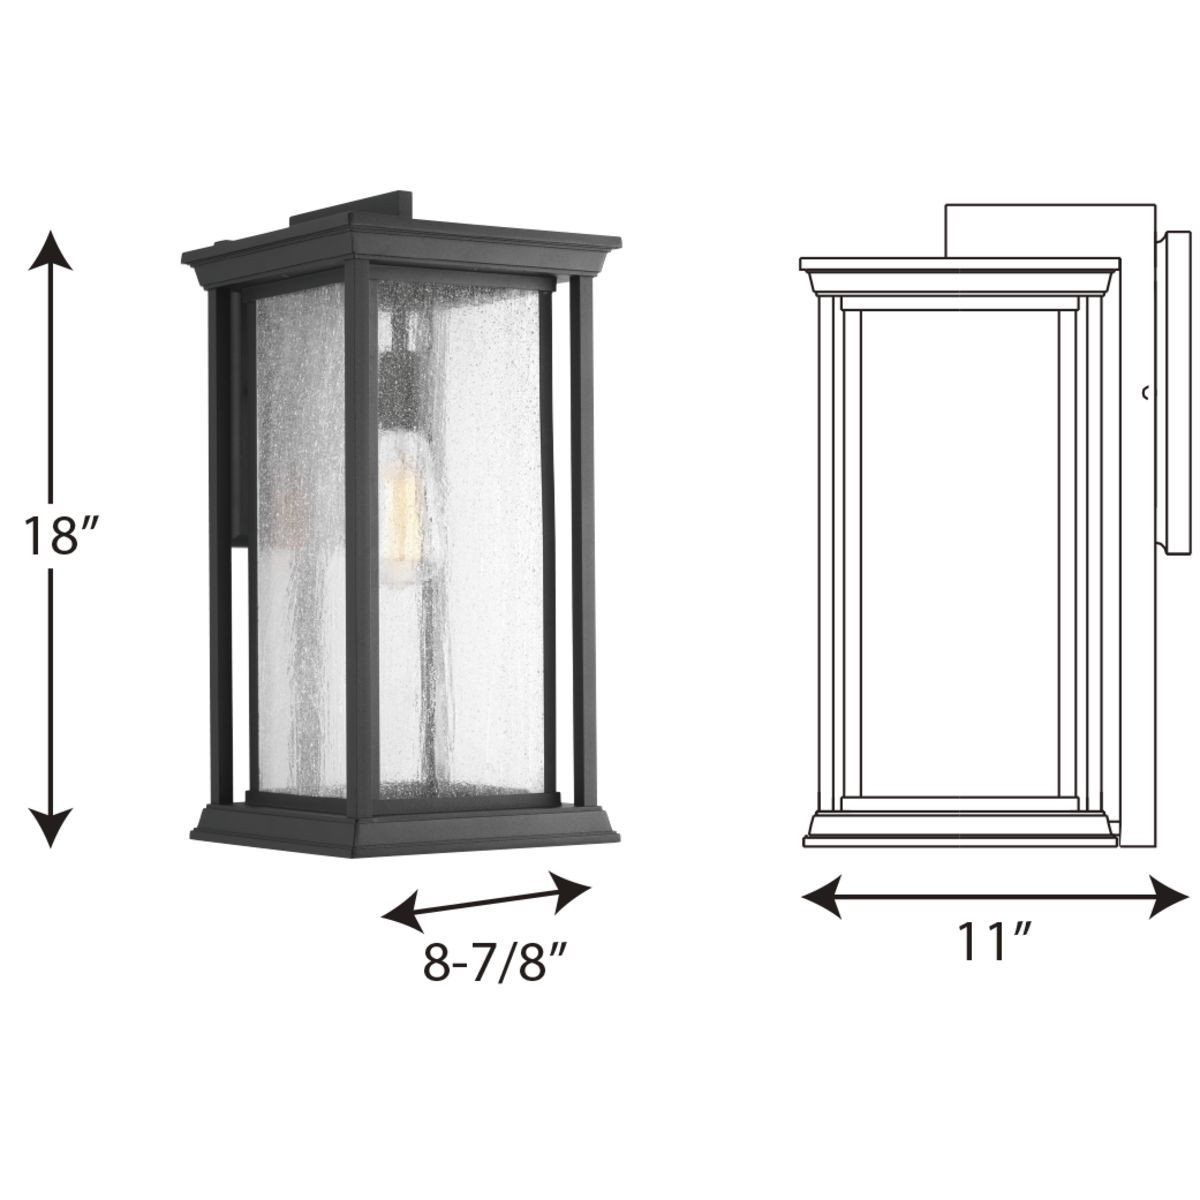 Endicott Collection One-Light Extra-Large Wall Lantern | P5613-31 